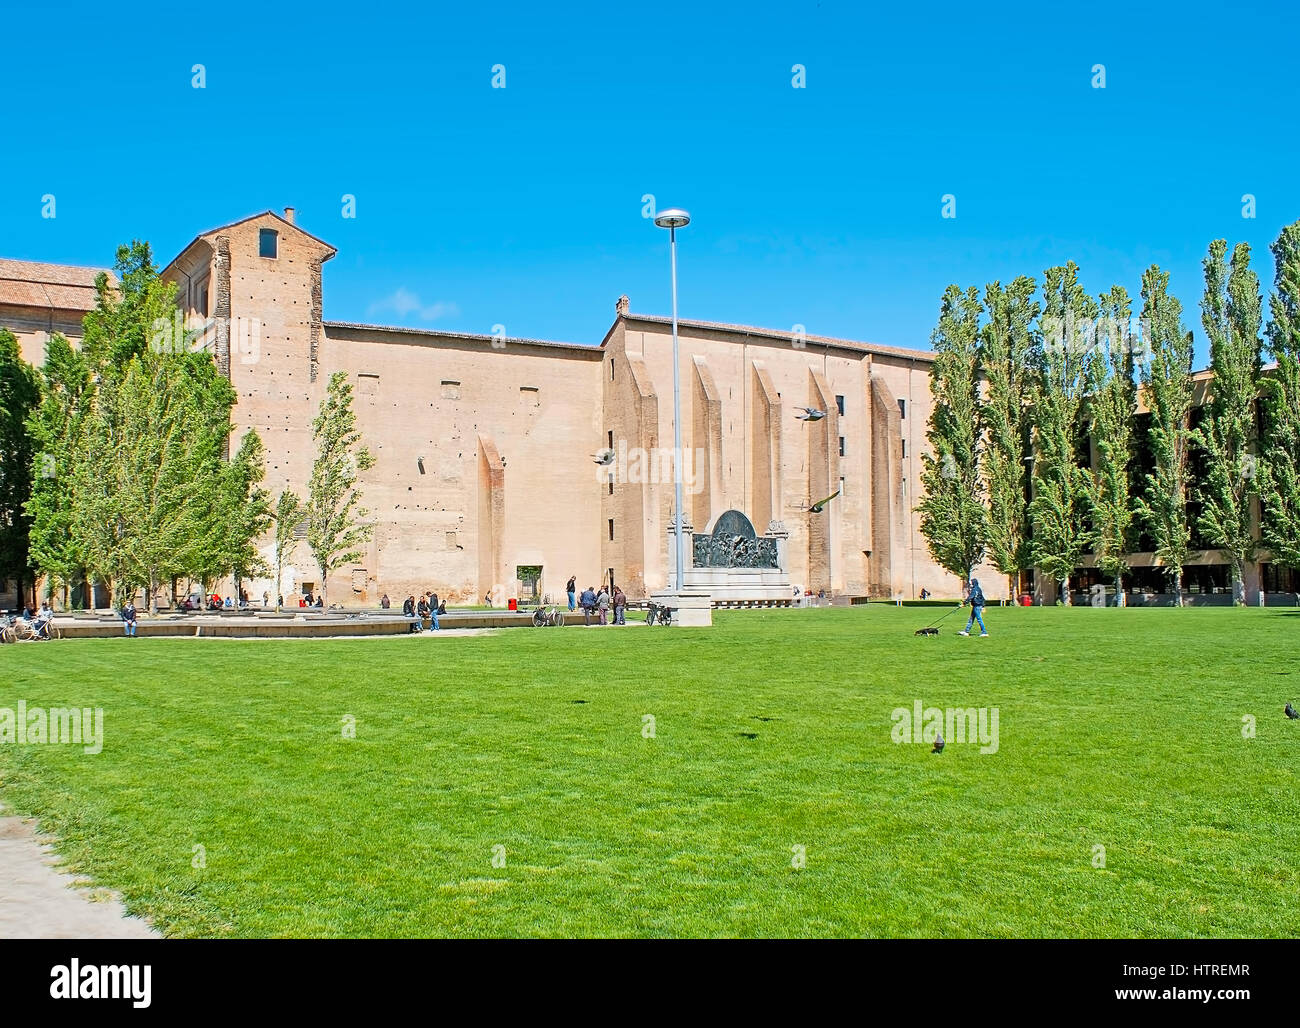 PARMA, ITALY - APRIL 24, 2012: The green lawn on Pace Square in front of the Palace of Pilotta, the medieval complex and one of the main place of tour Stock Photo